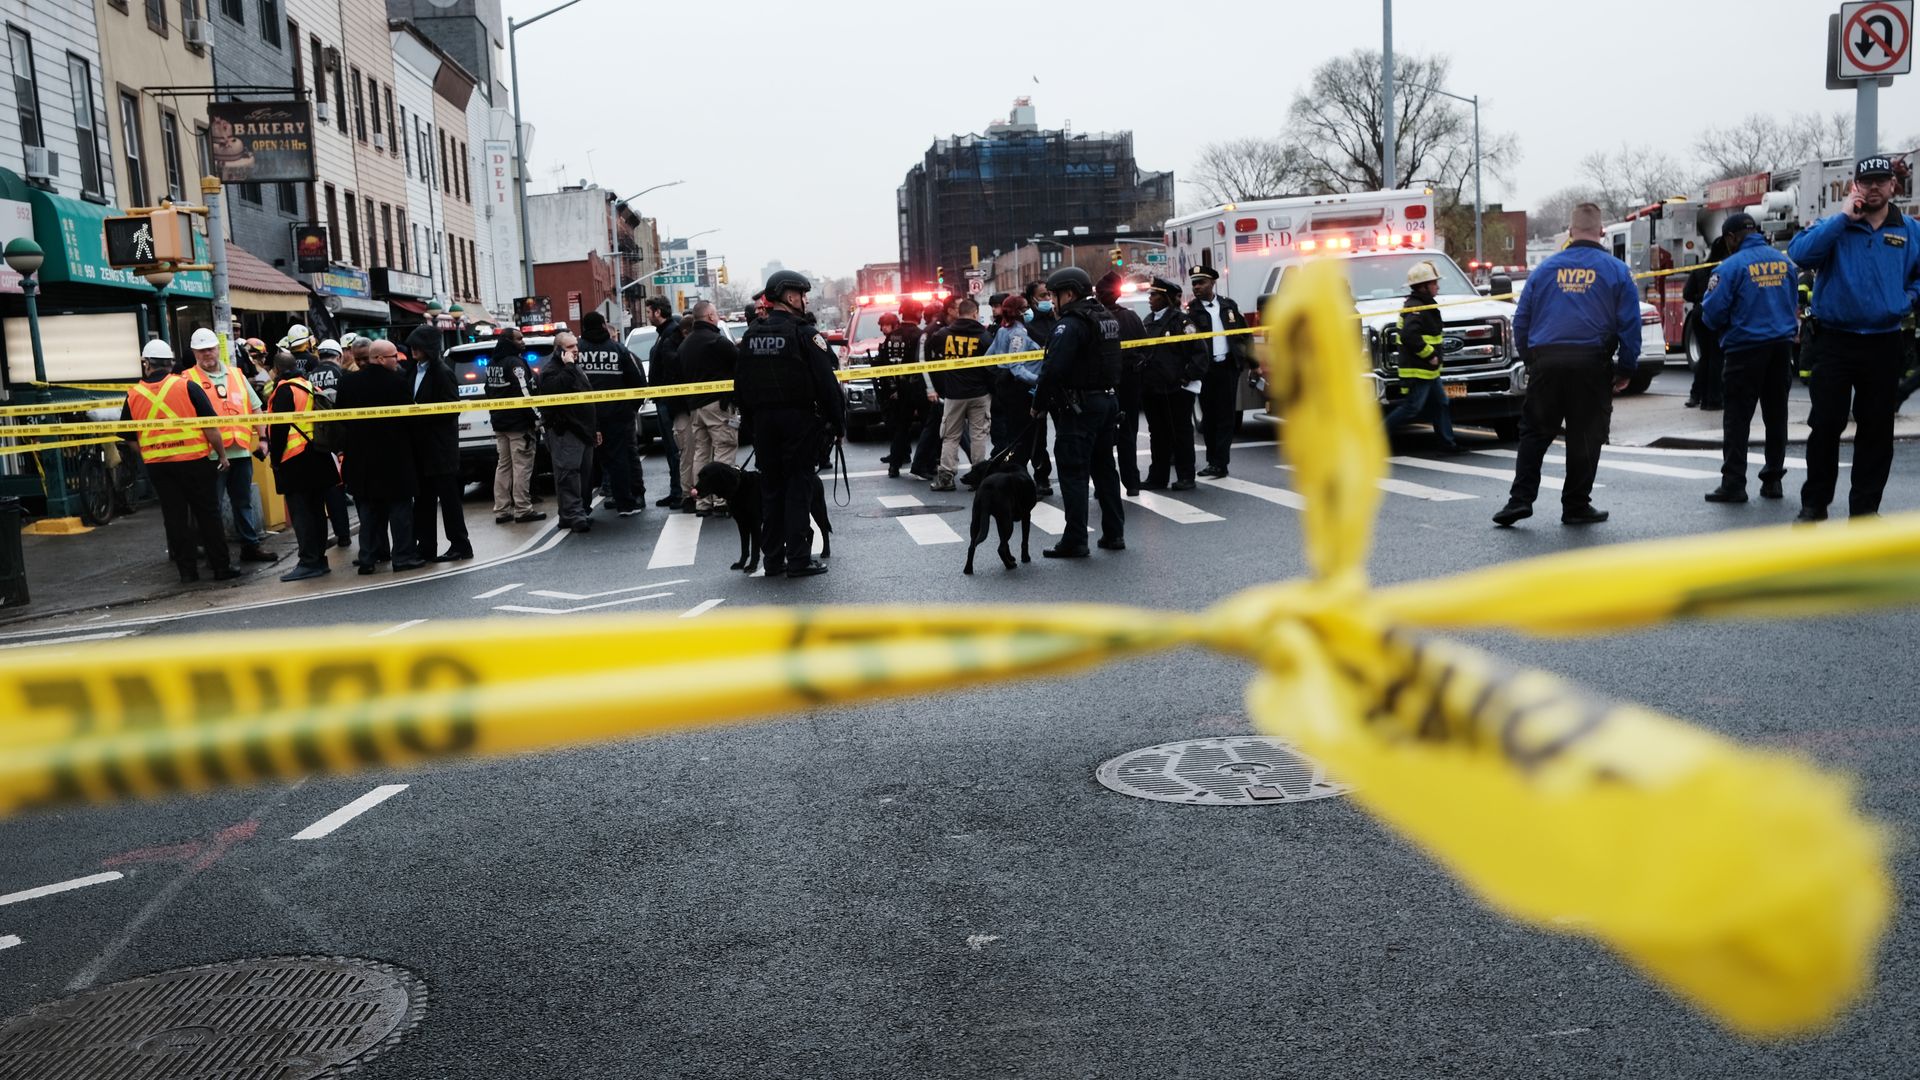 Police and emergency responders near the 36 Street subway station in Brooklyn, New York City, on April 12.